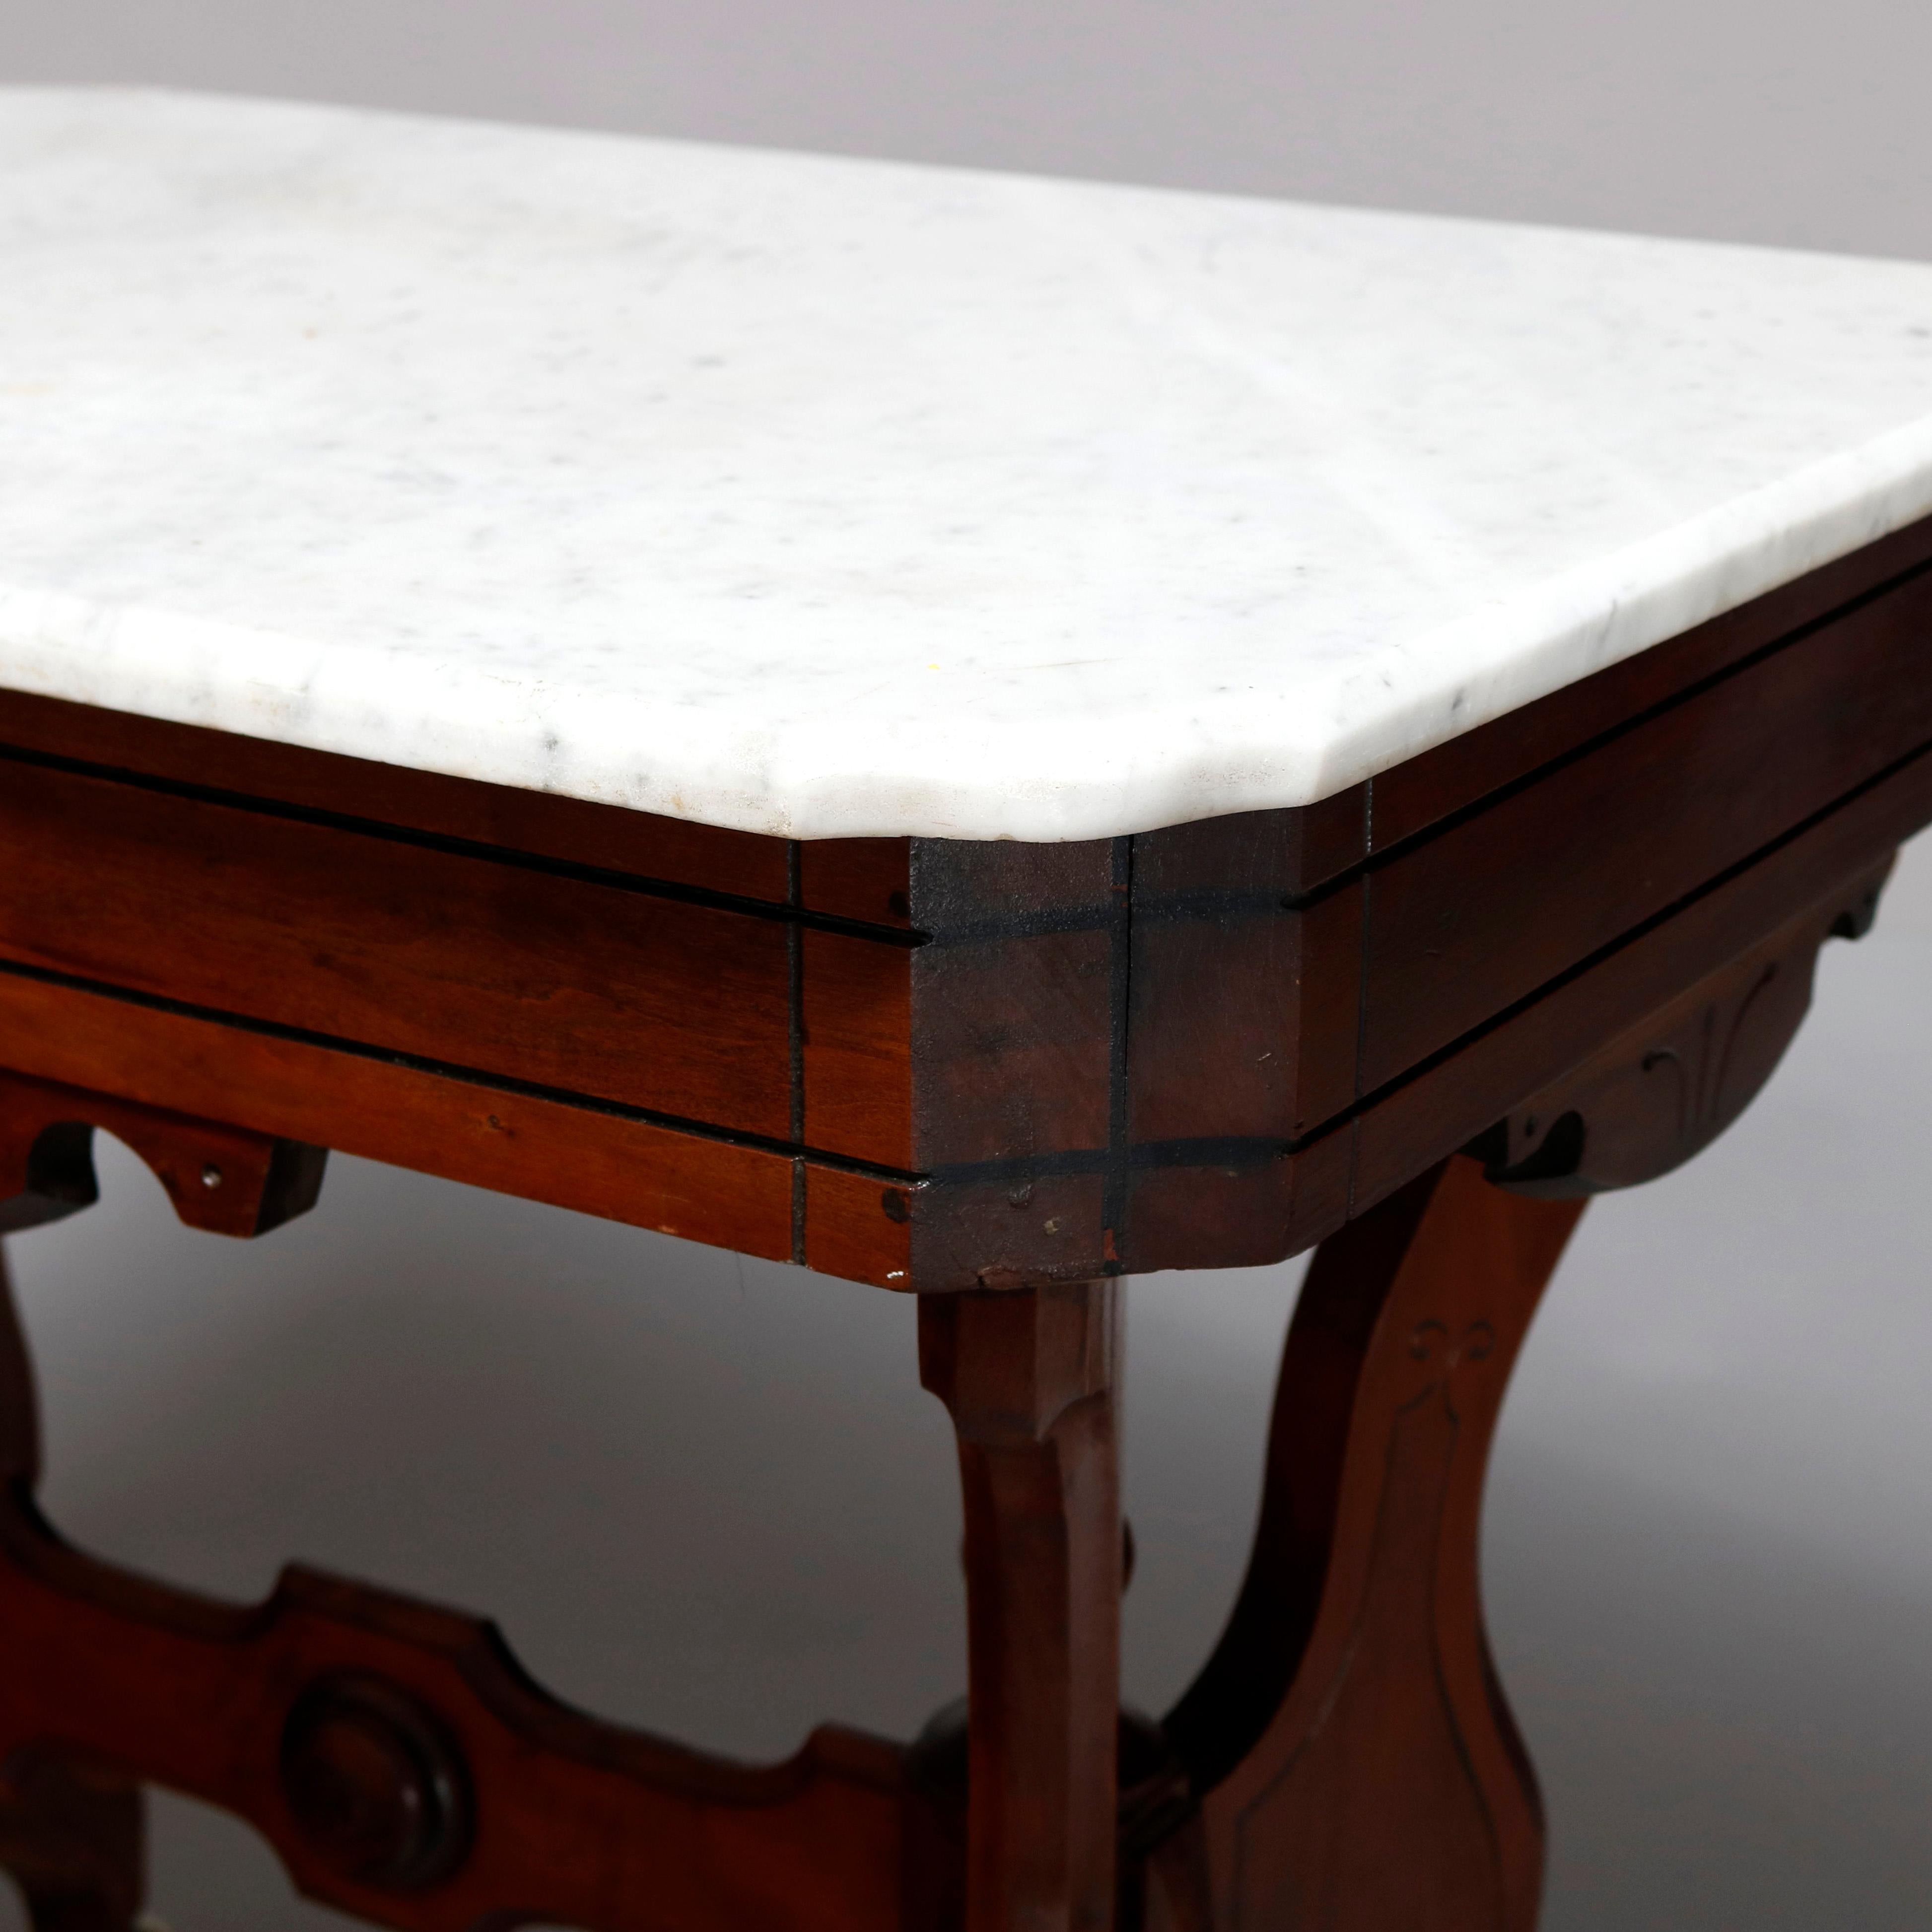 American Antique Victorian Eastlake Carved Walnut & Beveled Marble Side Table, circa 1880